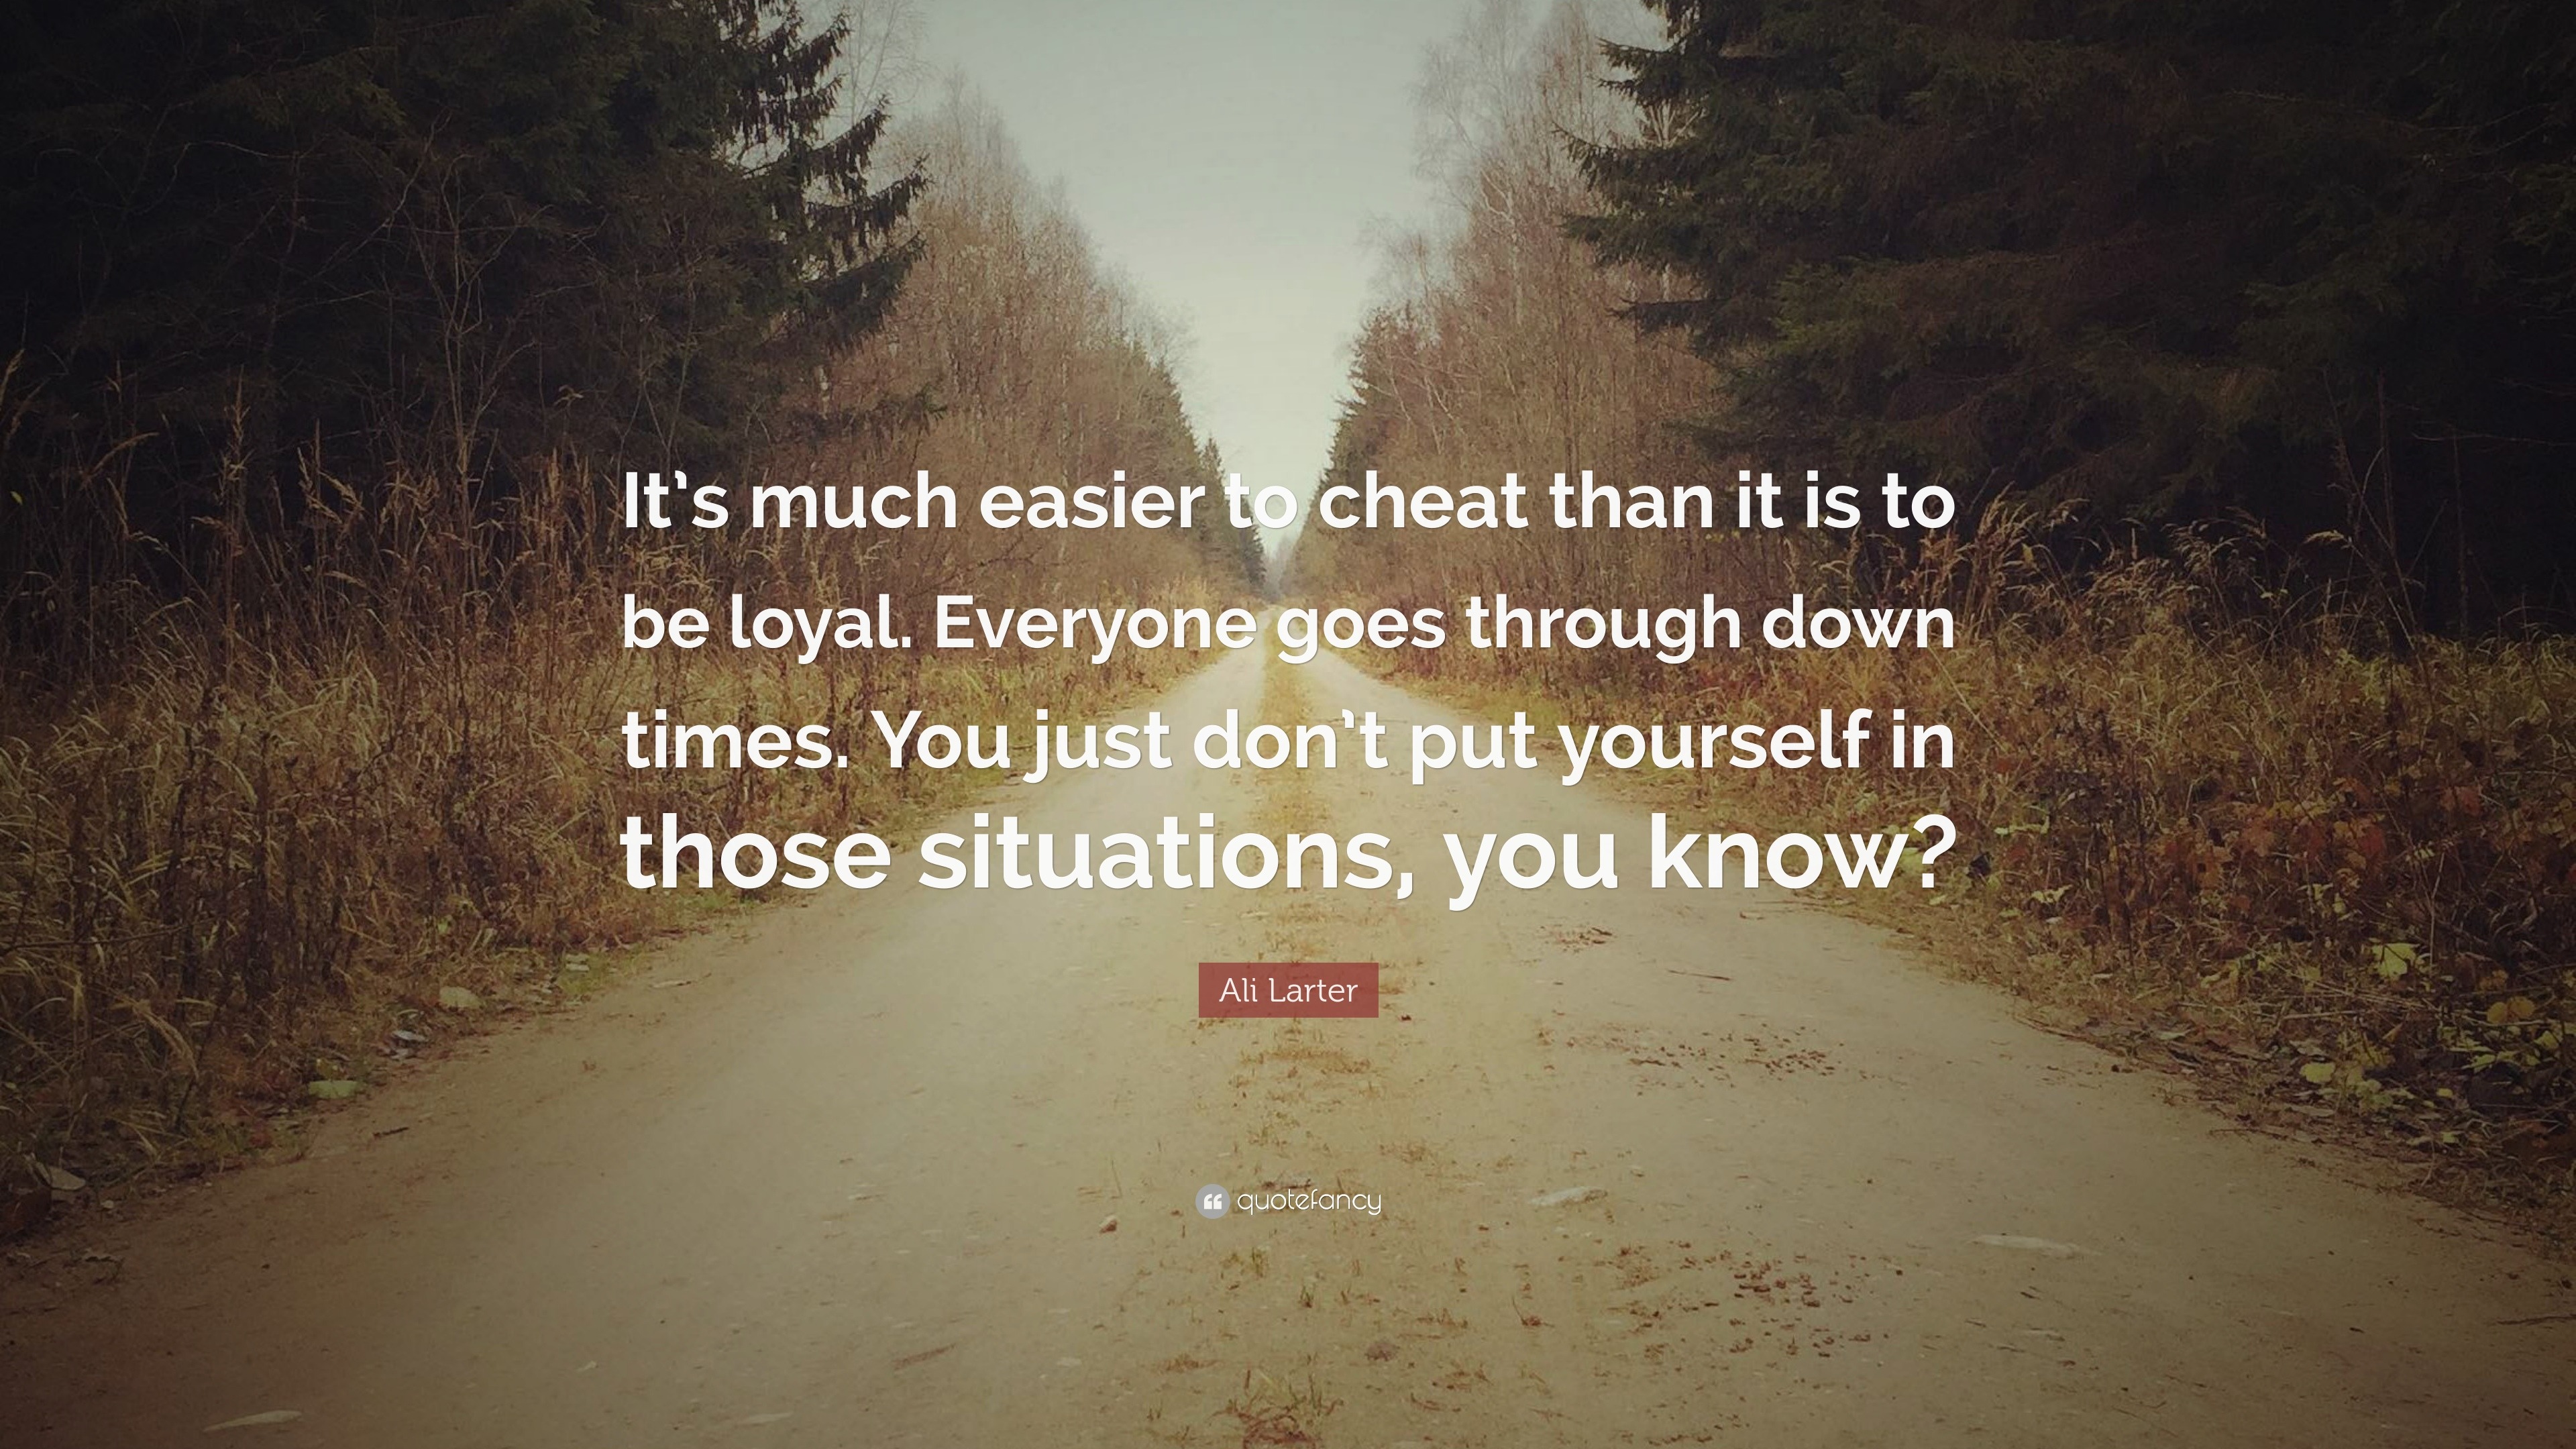 Ali Larter Quote: “It’s much easier to cheat than it is to be loyal ...